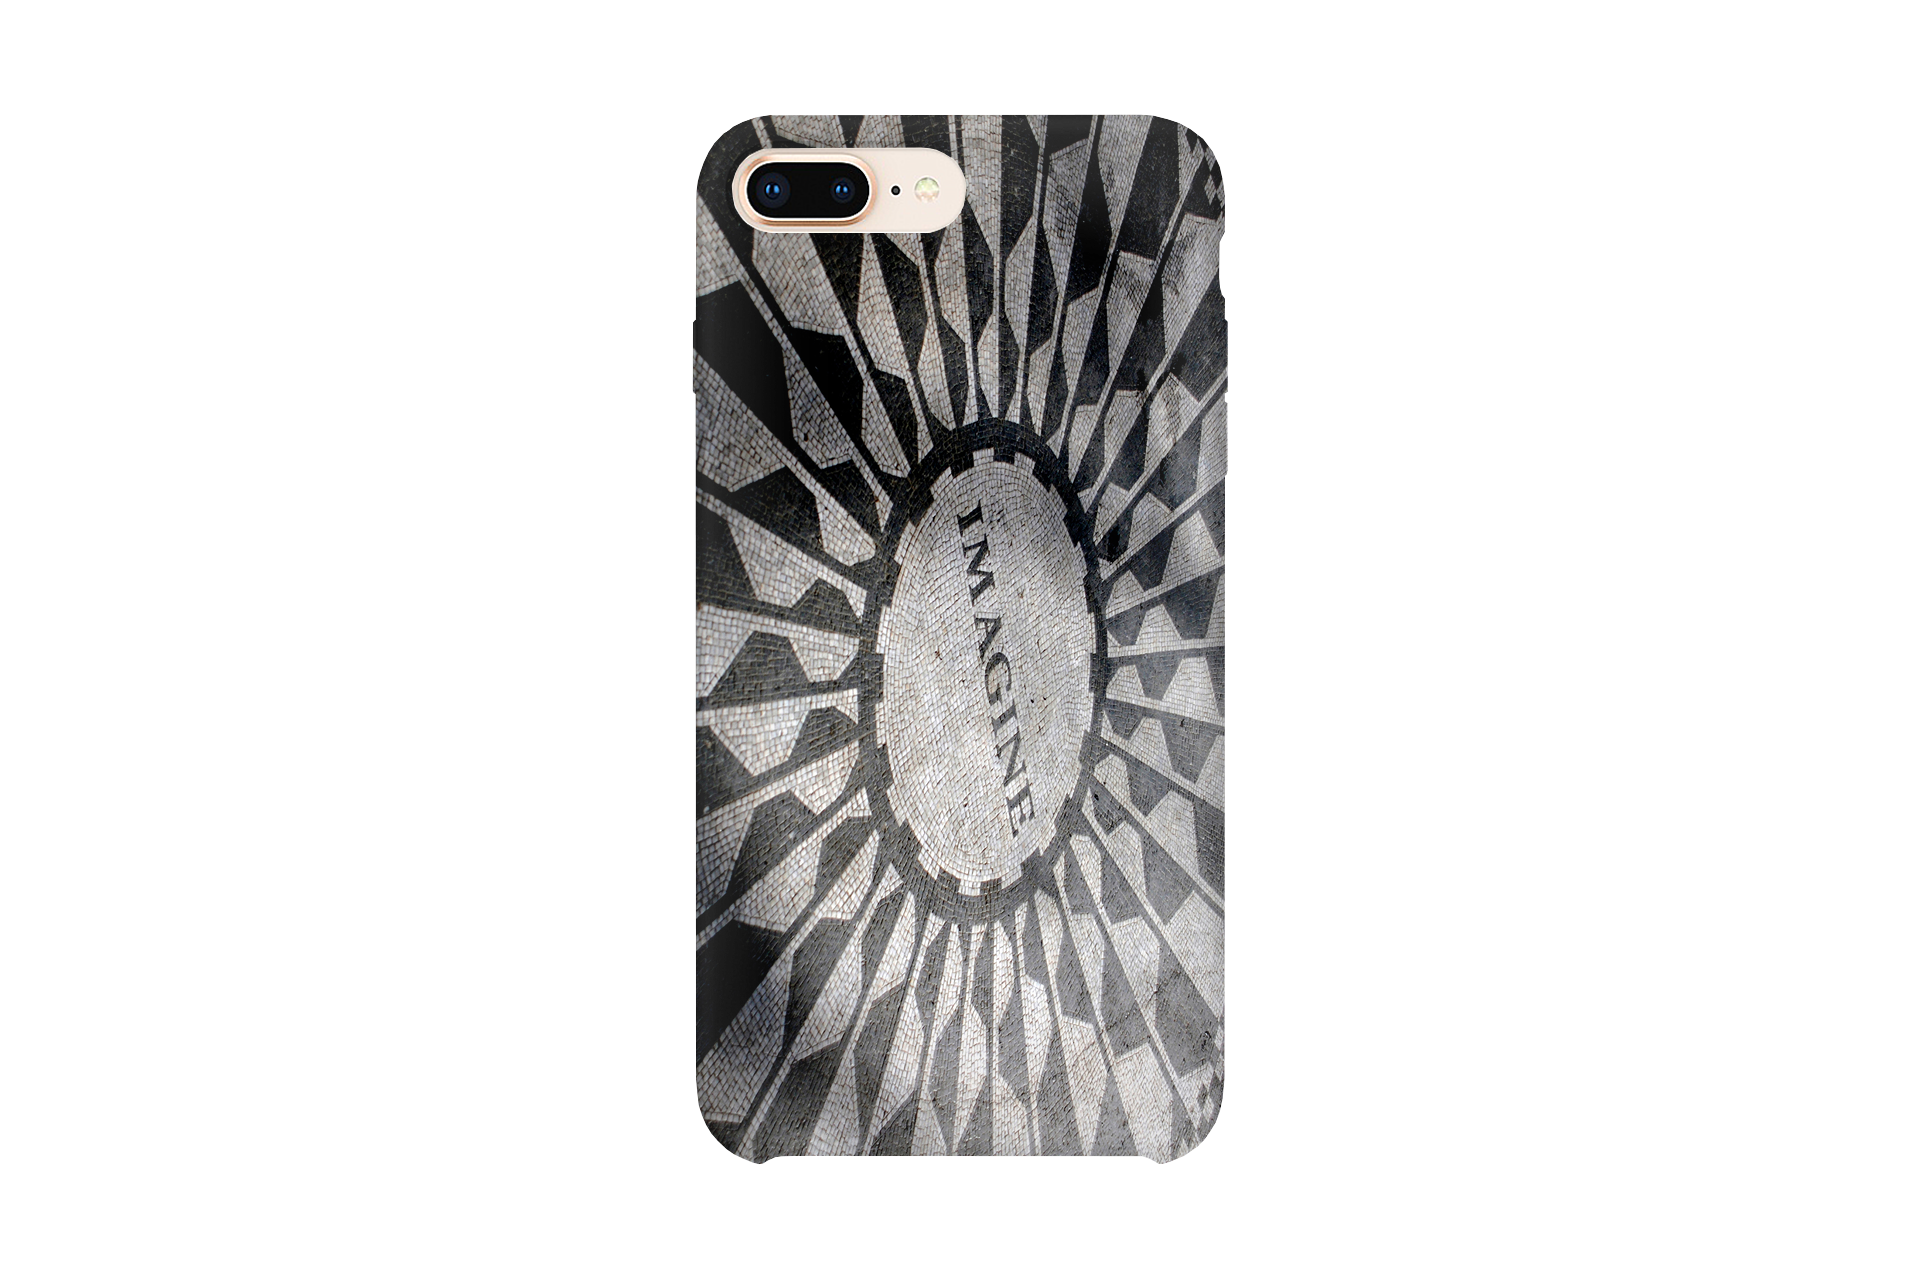 Imagine Strawberry Fields Central Park iPhone case by Mike Lindwasser